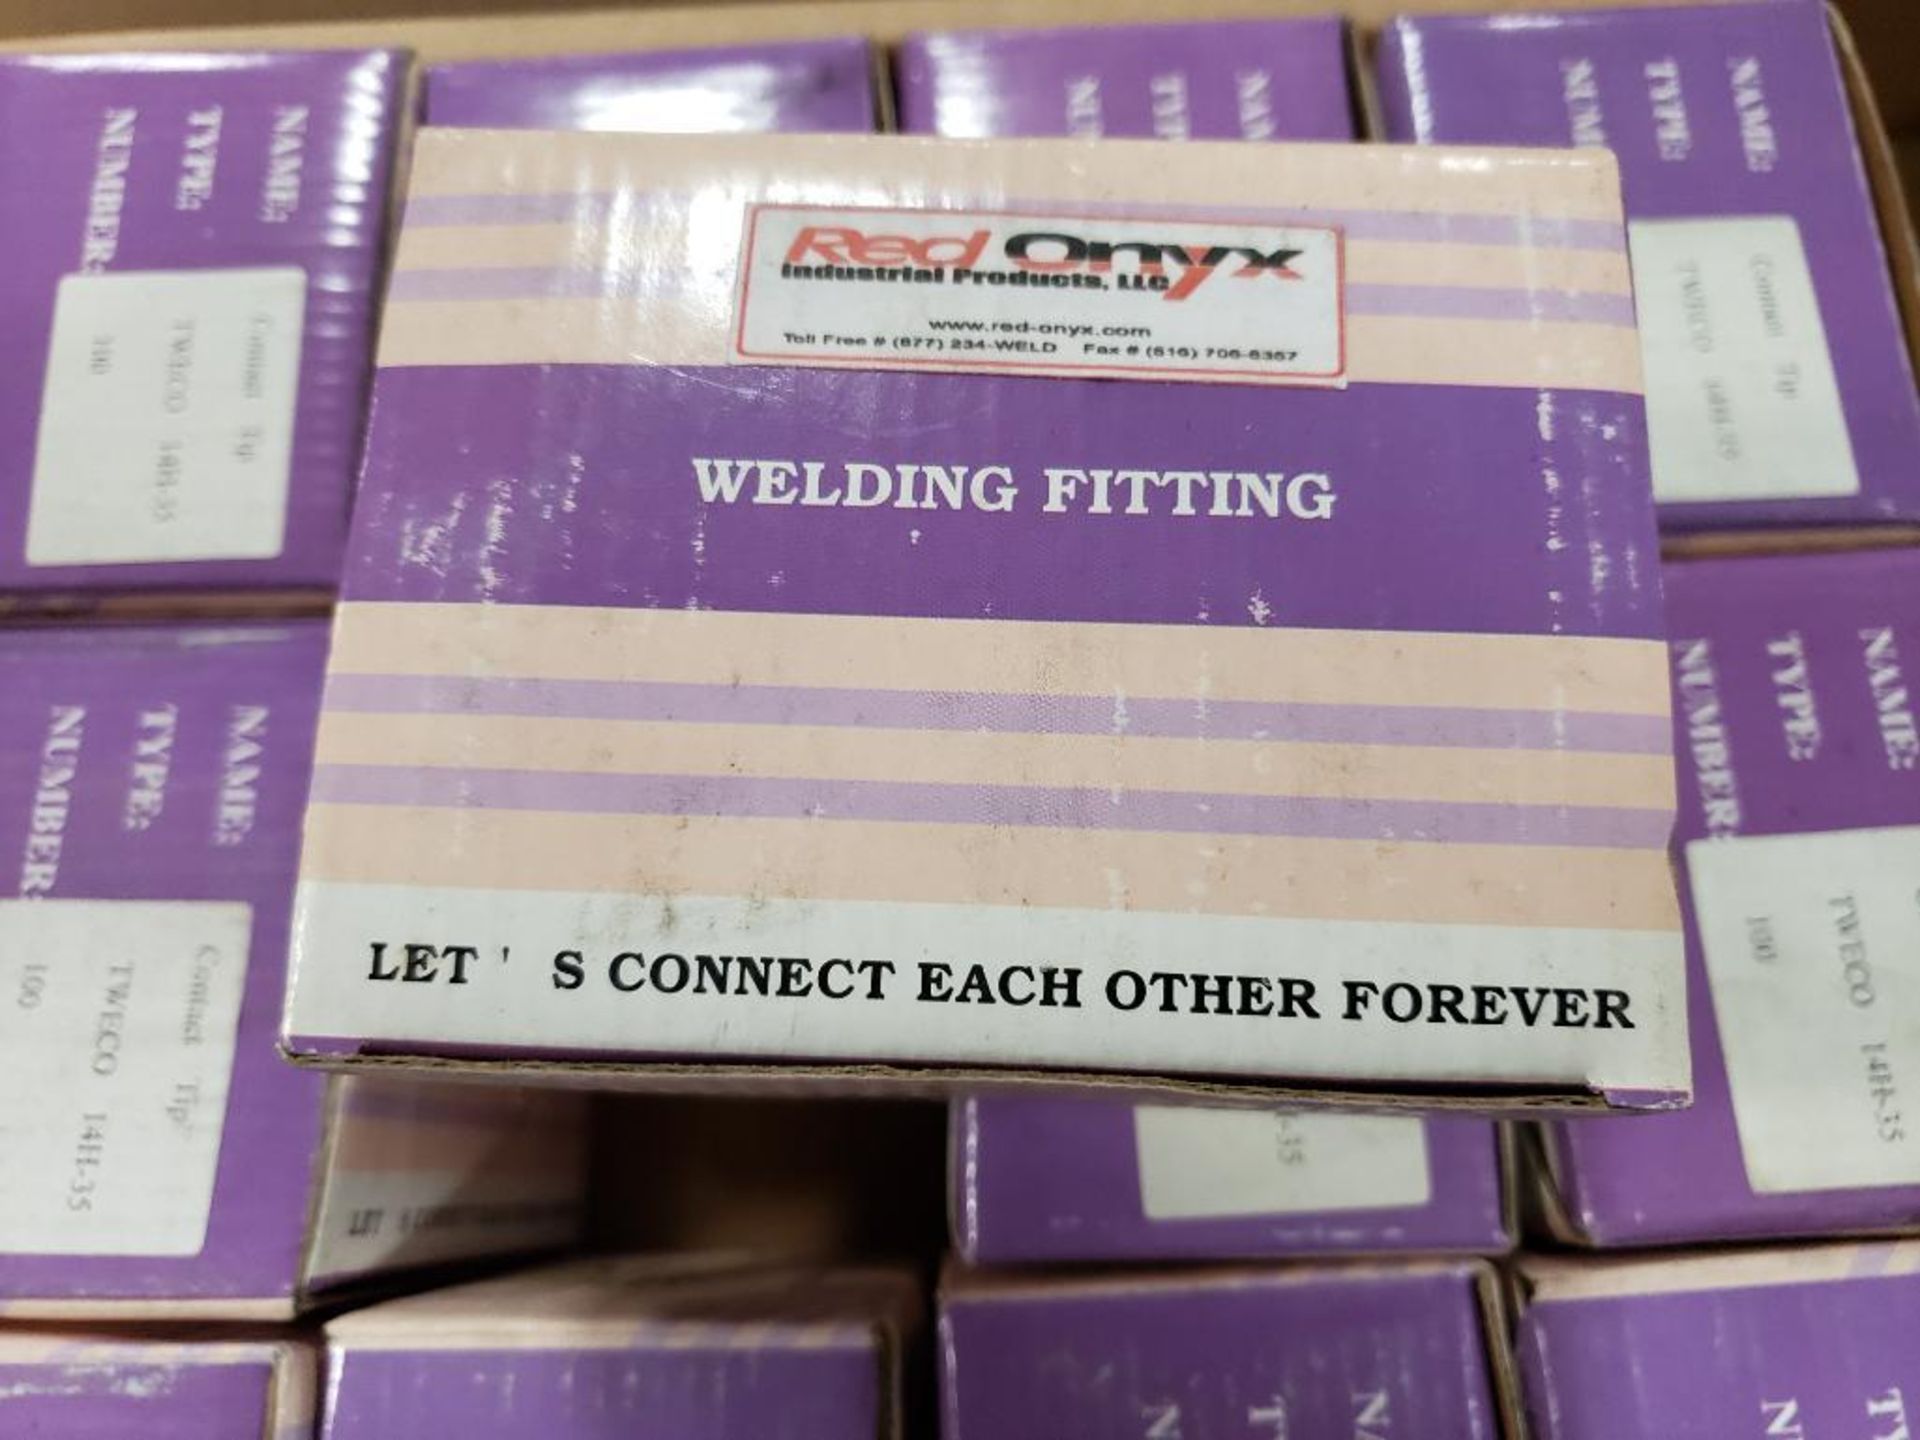 Qty 1200 - Red Onyx welding tips. Part number 14H-35. 12 boxes of 100 in 10 packs. - Image 2 of 3